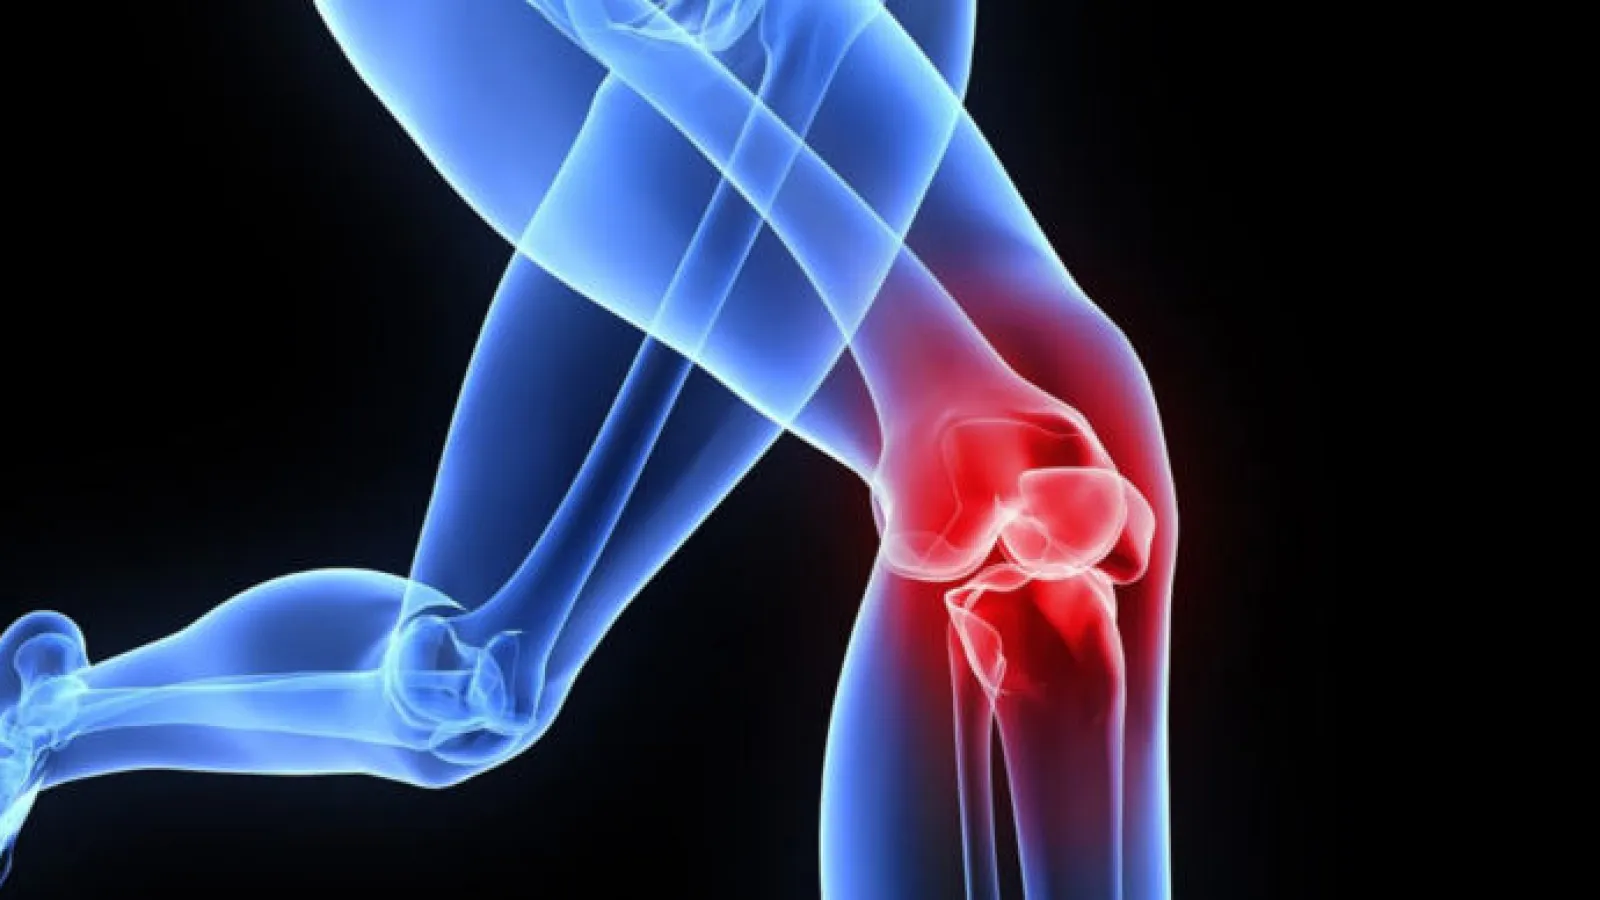  															Joint Replacement and Your Health and Well Being														